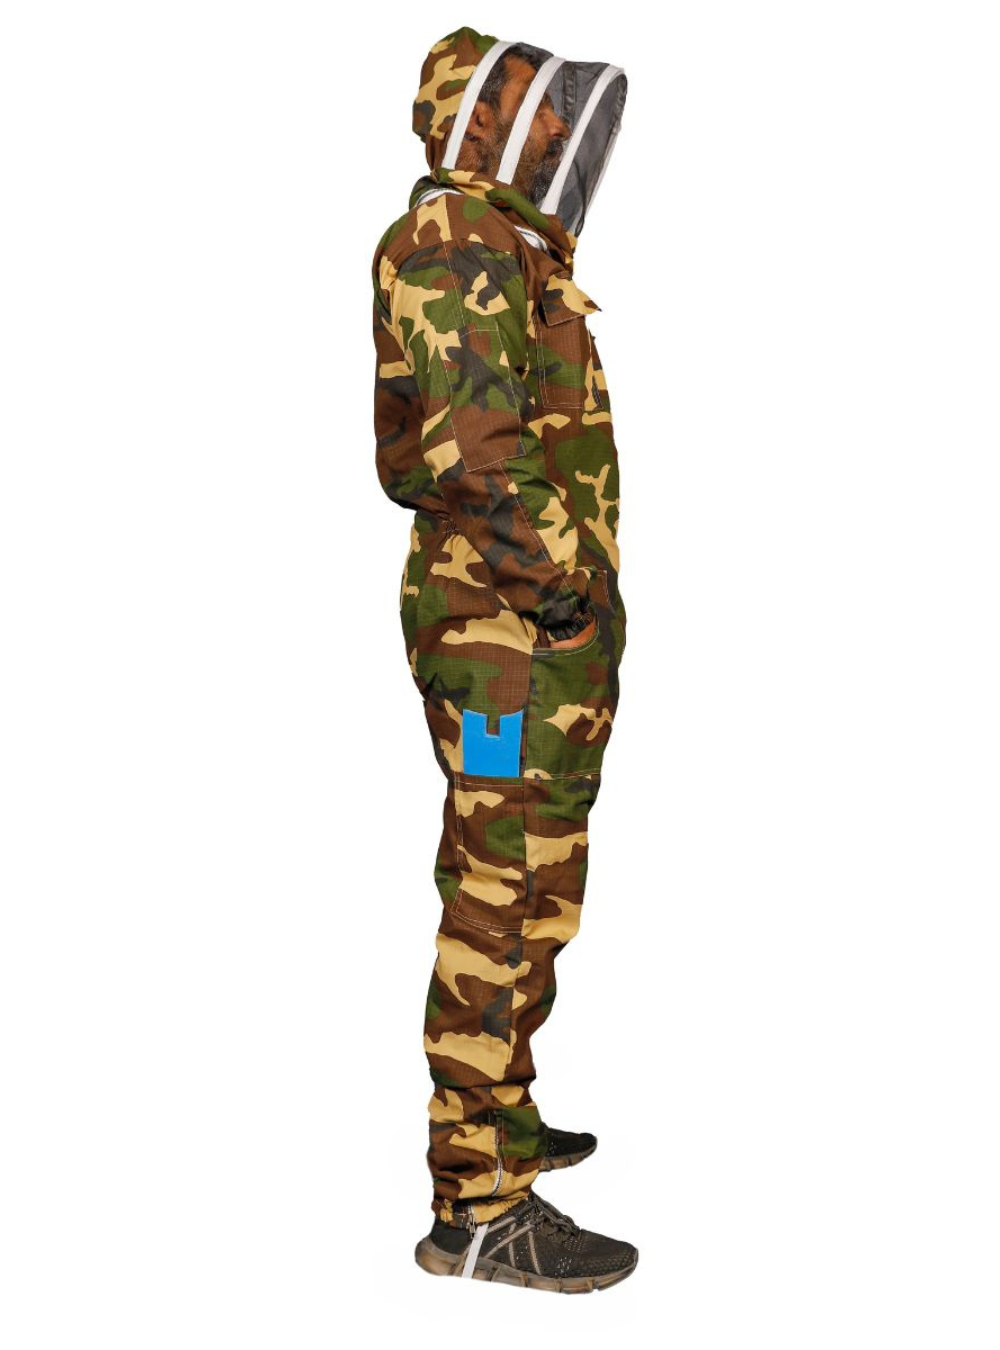 A side look of Camo Vented Mesh Beekeeping Bee suit, showcasing its sturdy construction of Fencing Veil and ample pockets.